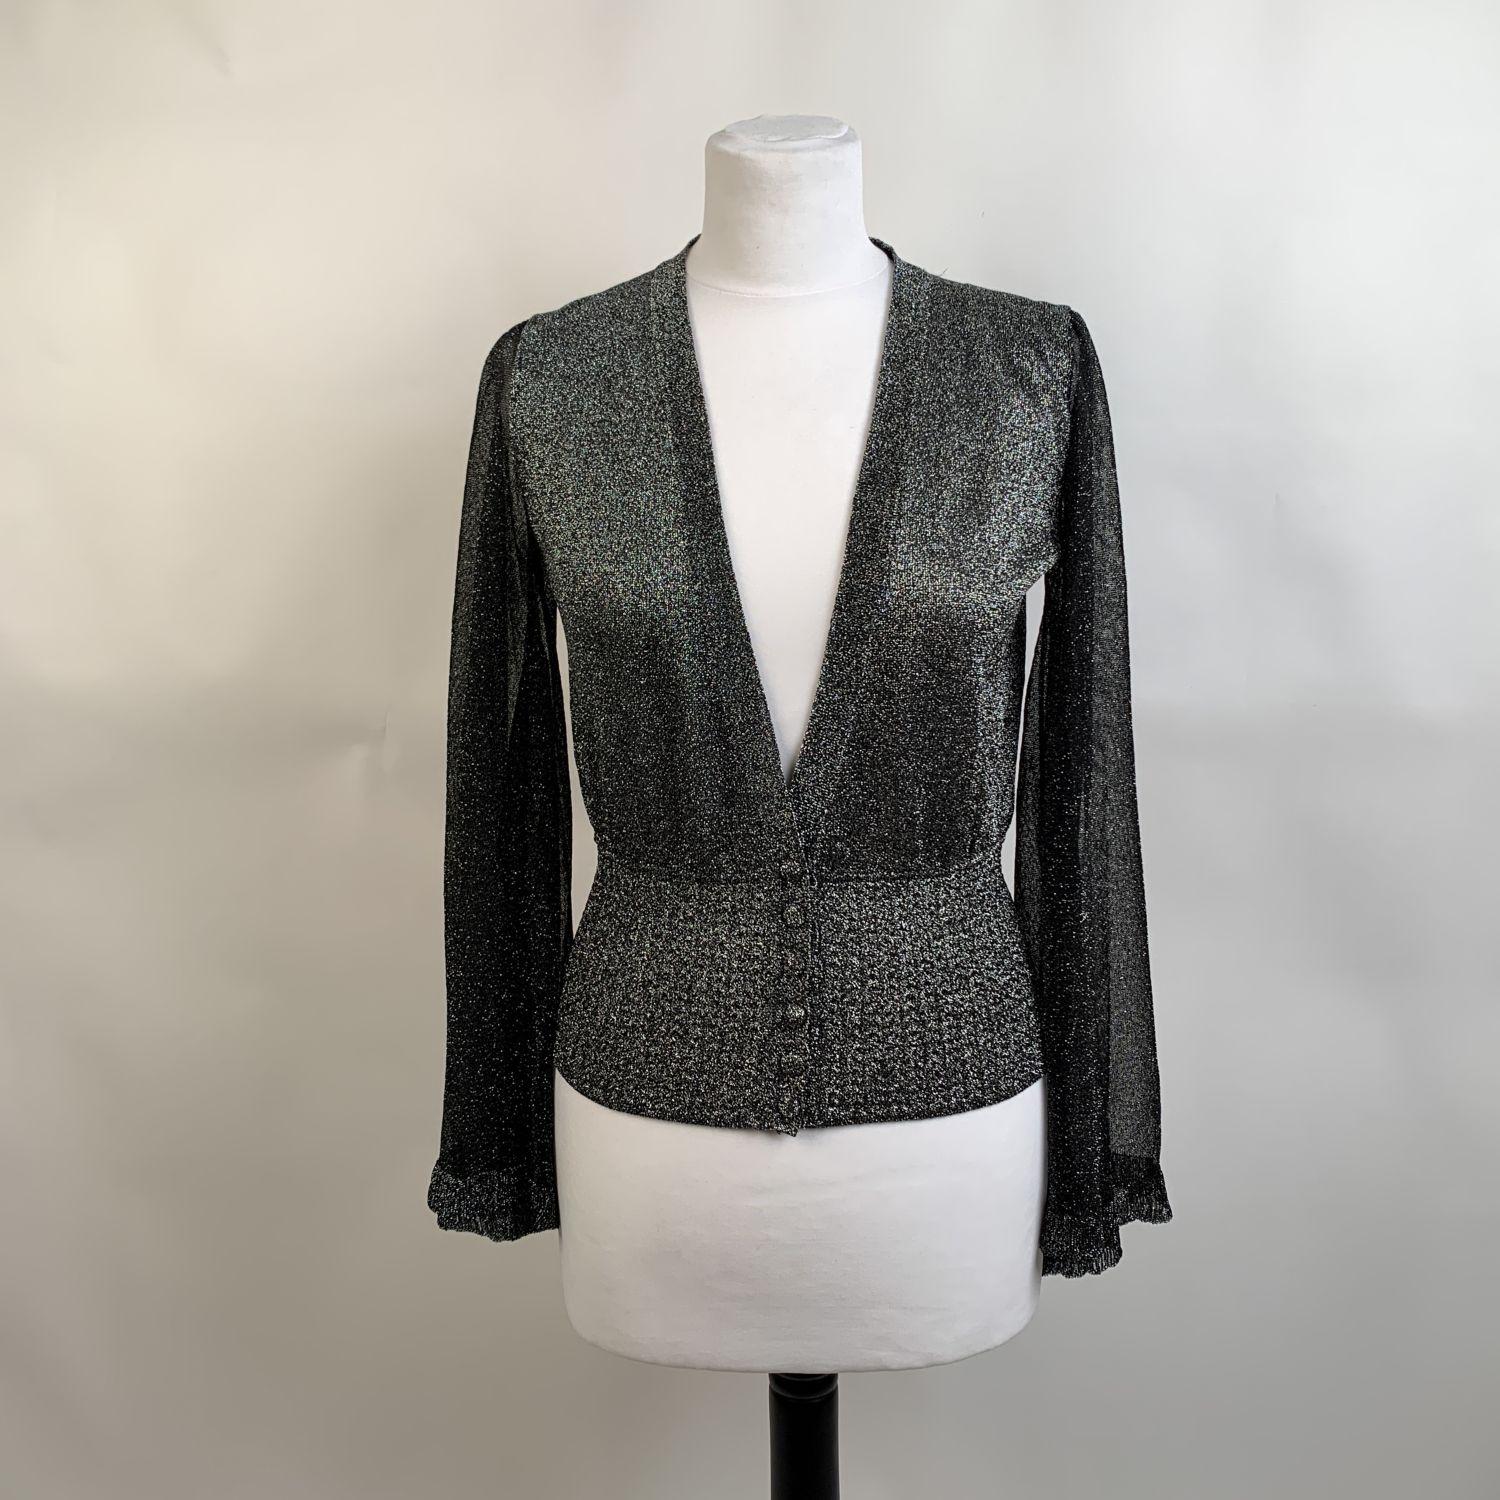 Missoni silver tone lurex cardigan with flared sleeves. It features button closure on the front and a deep V-neckline. Made in Italy. Size: 38 IT (The size shown for this item is the size indicated by the designer on the label). It should correspond